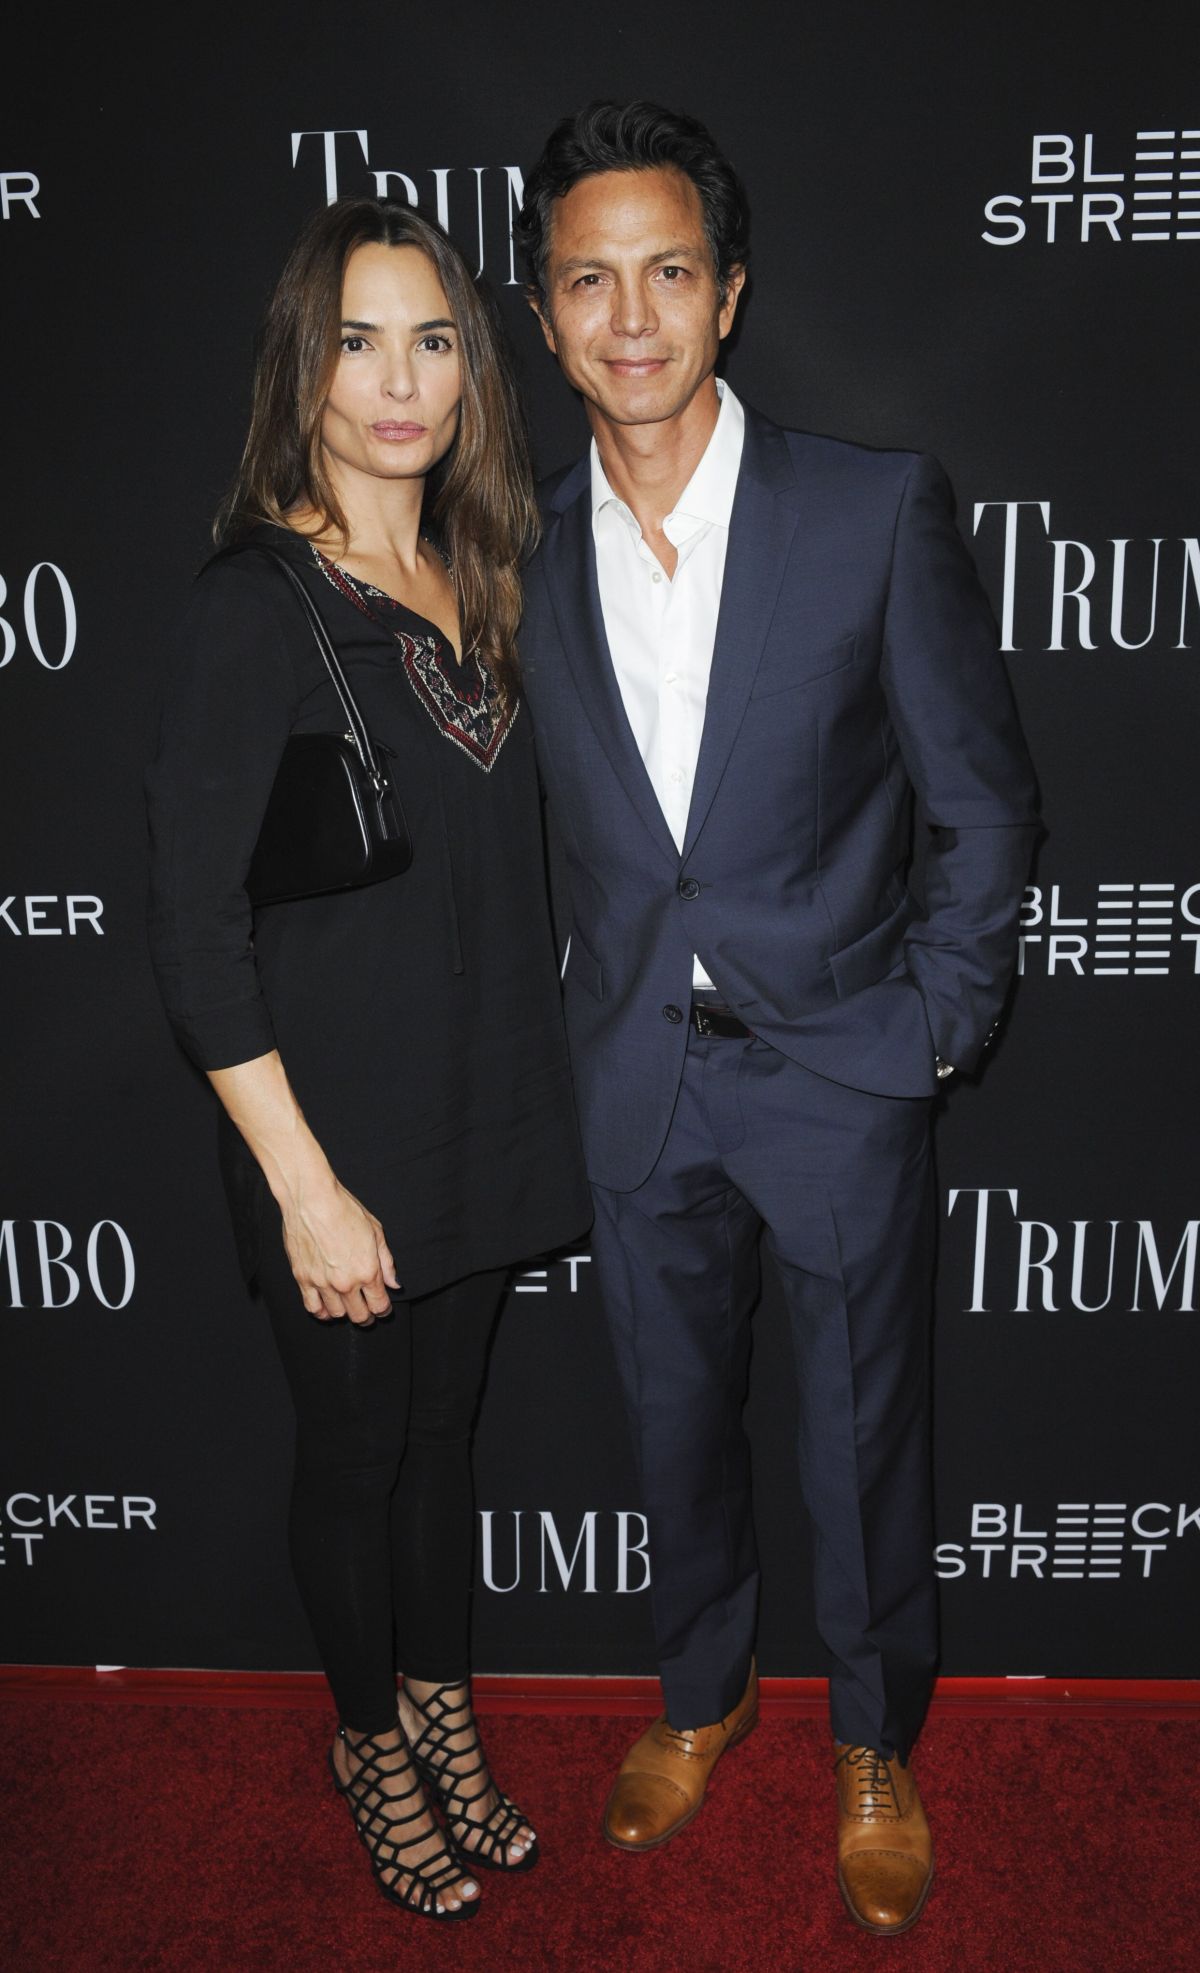 TALISA SOTO at Trumbo Premiere in Beverly Hills 10/27/2015.